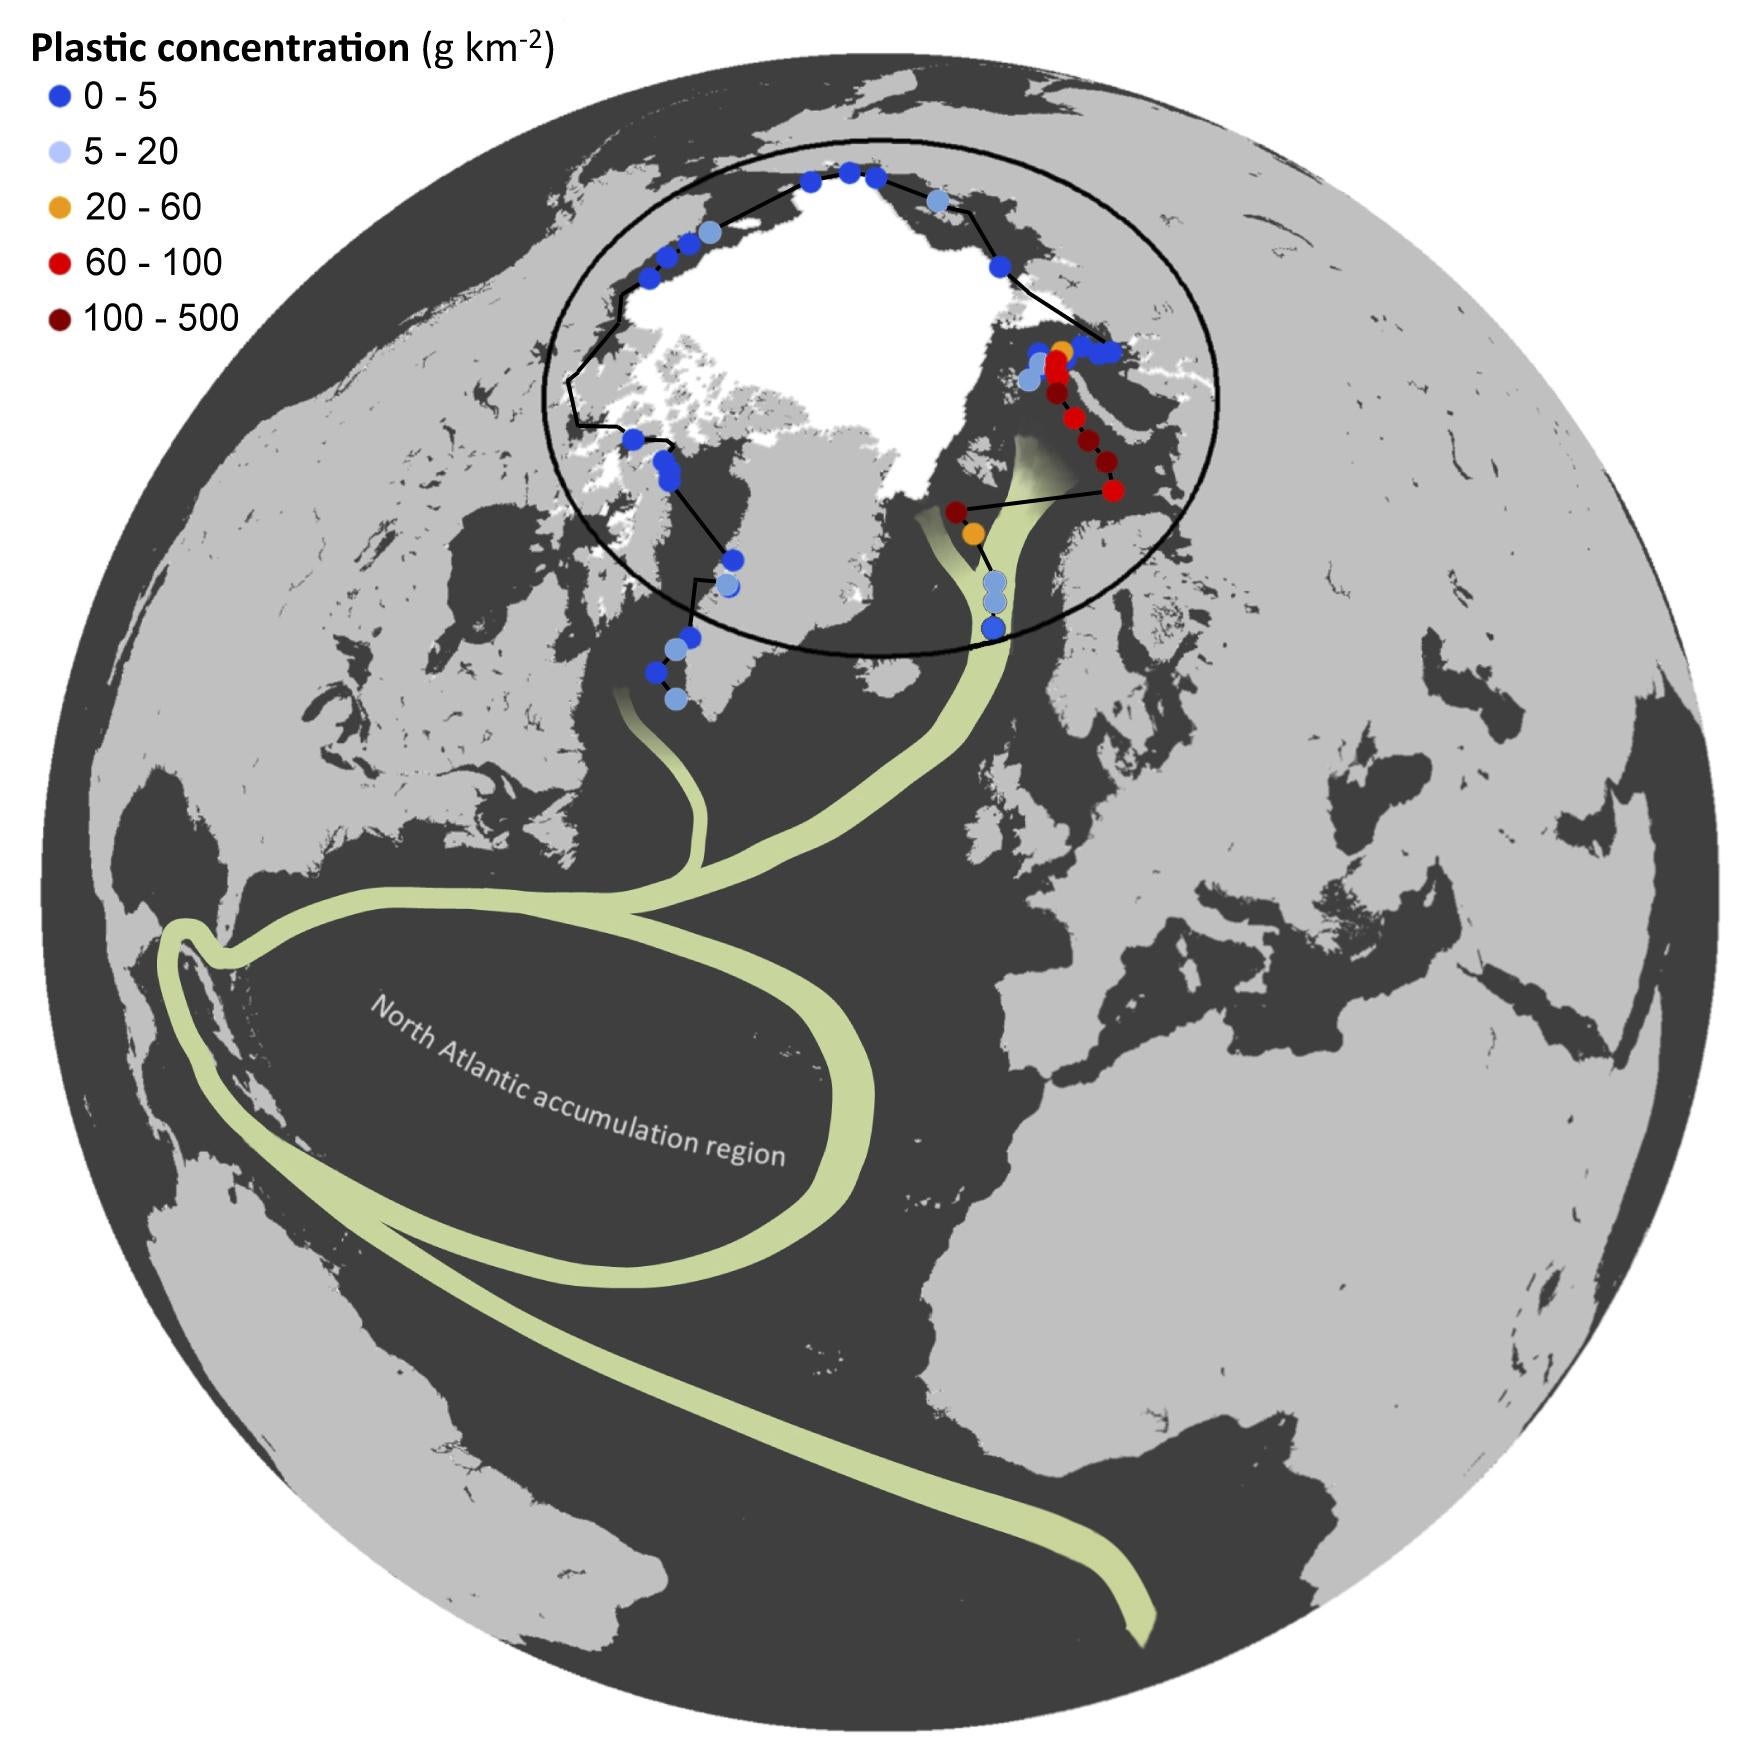 The route taken by plastic pollution from the Atlantic to the Arctic